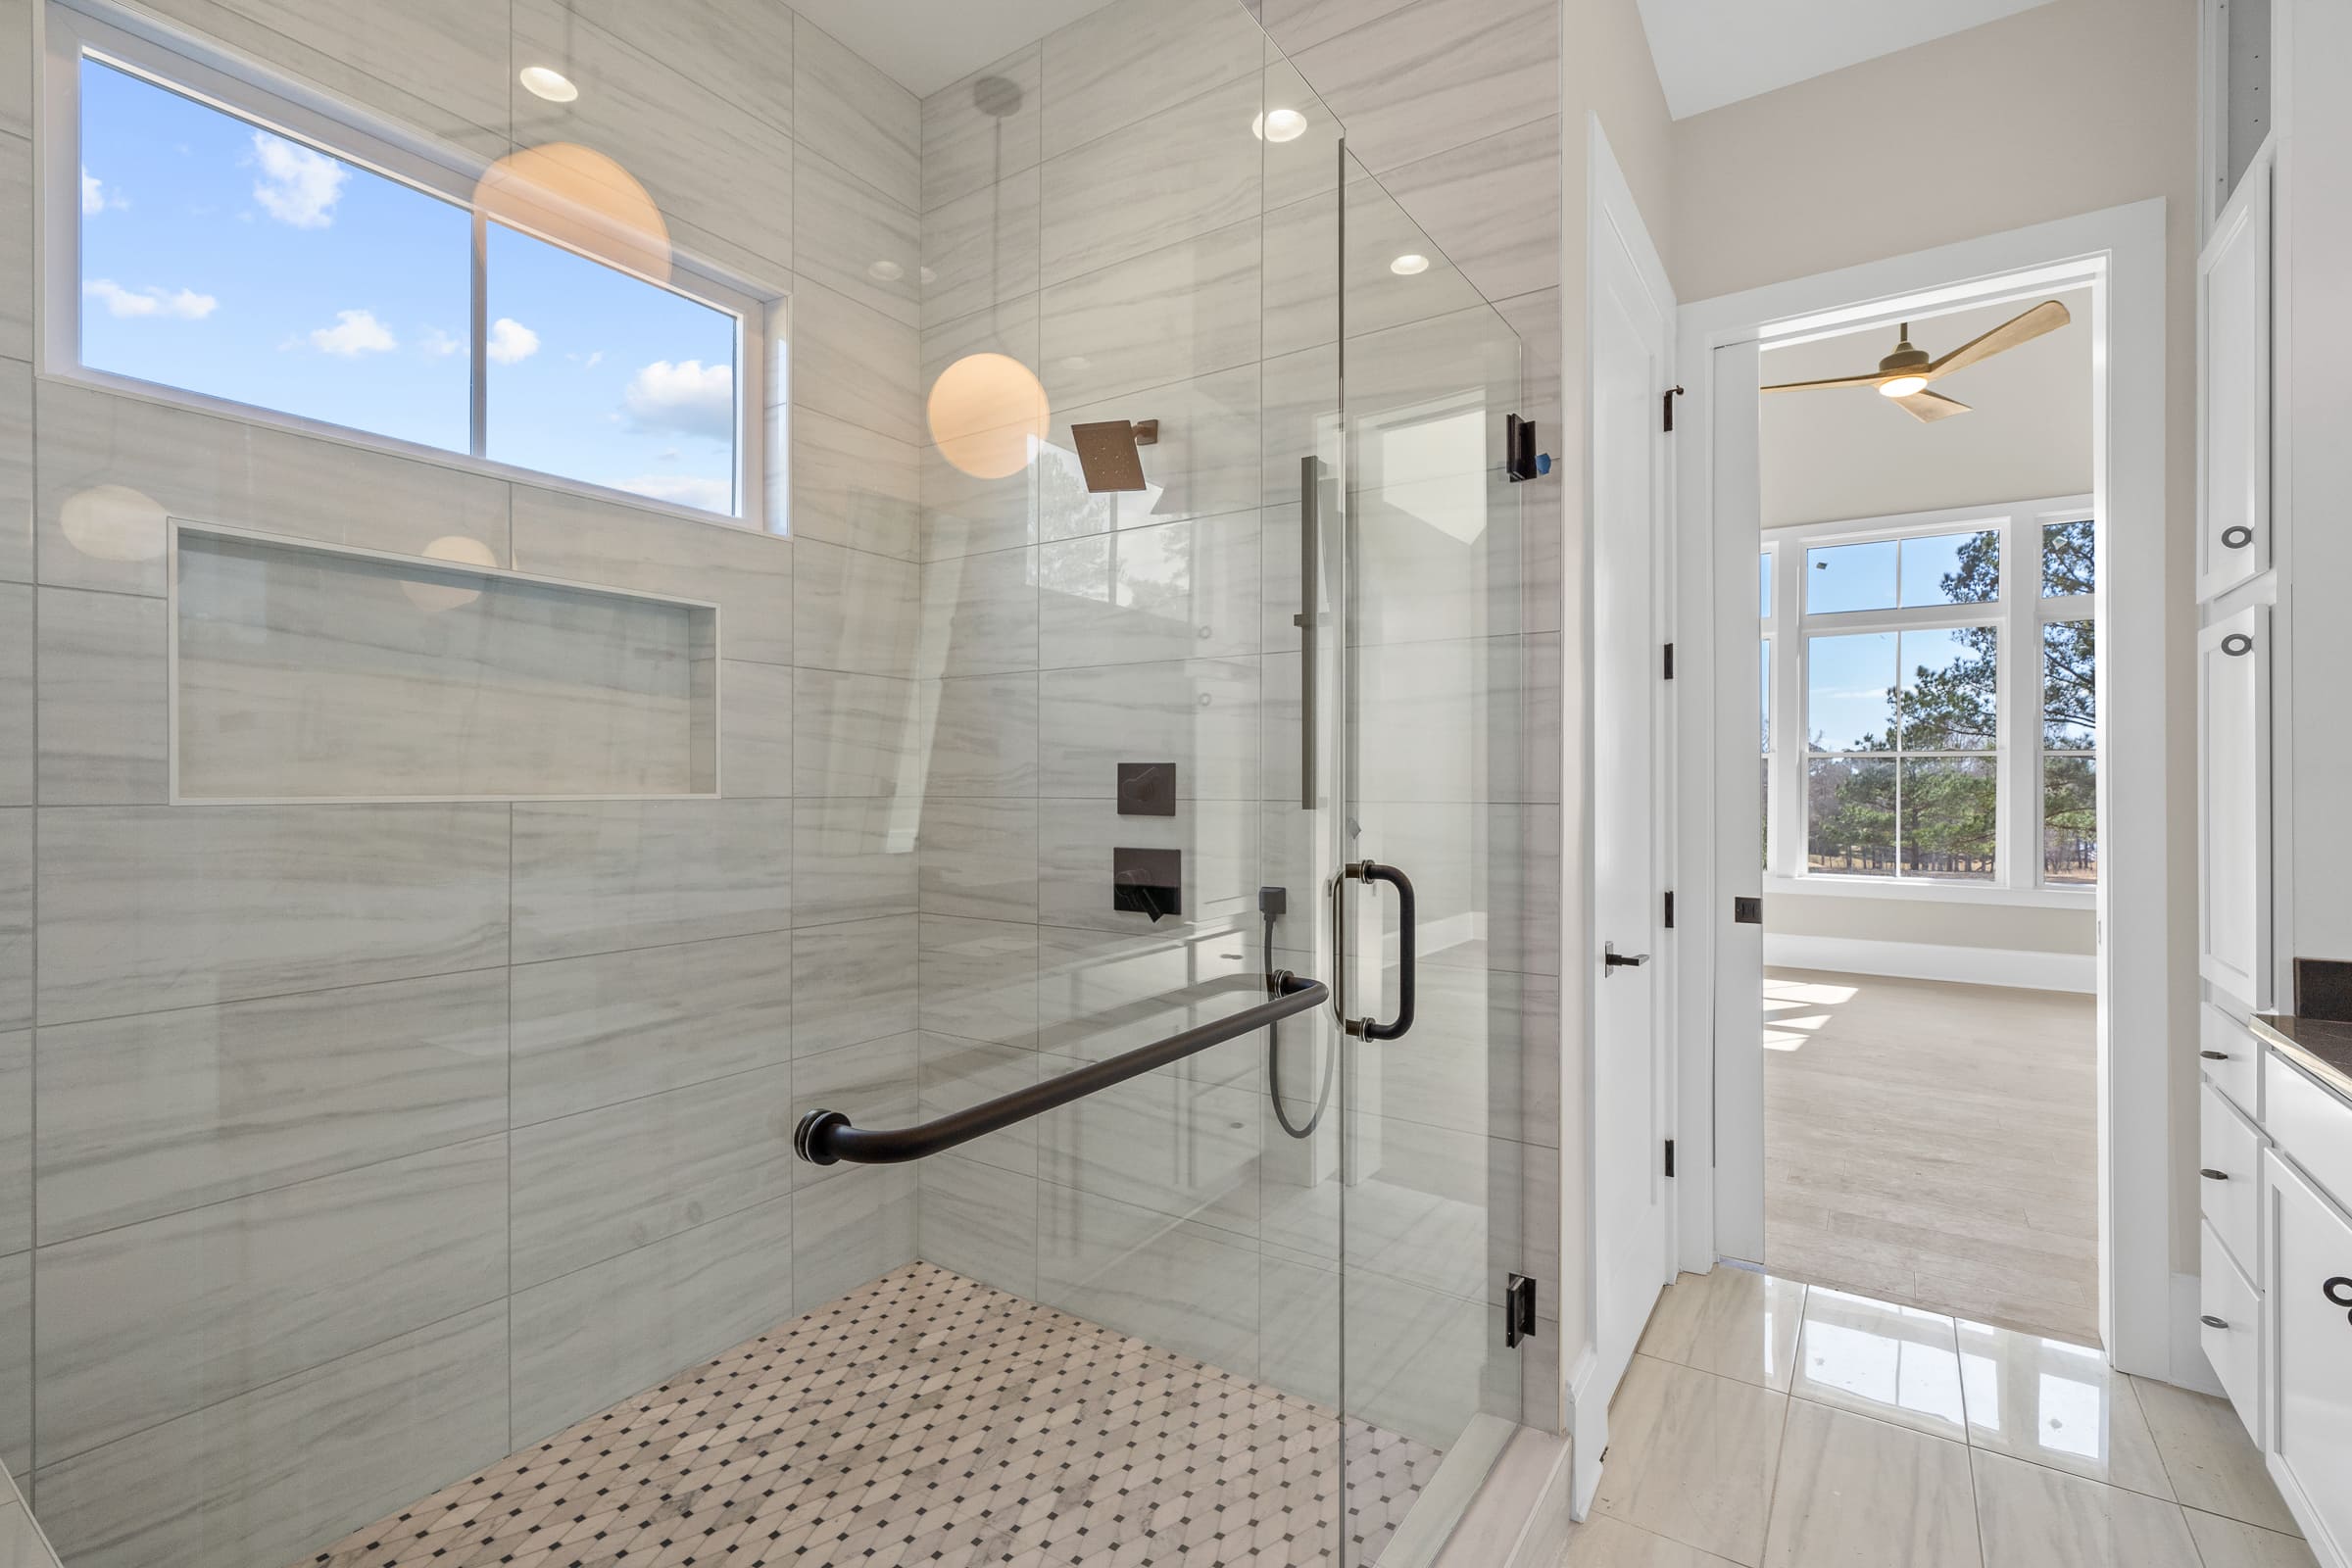 Primary Bathroom Shower with Large Glass Doors and Gorgeous Tiling Features |PAXISgroup